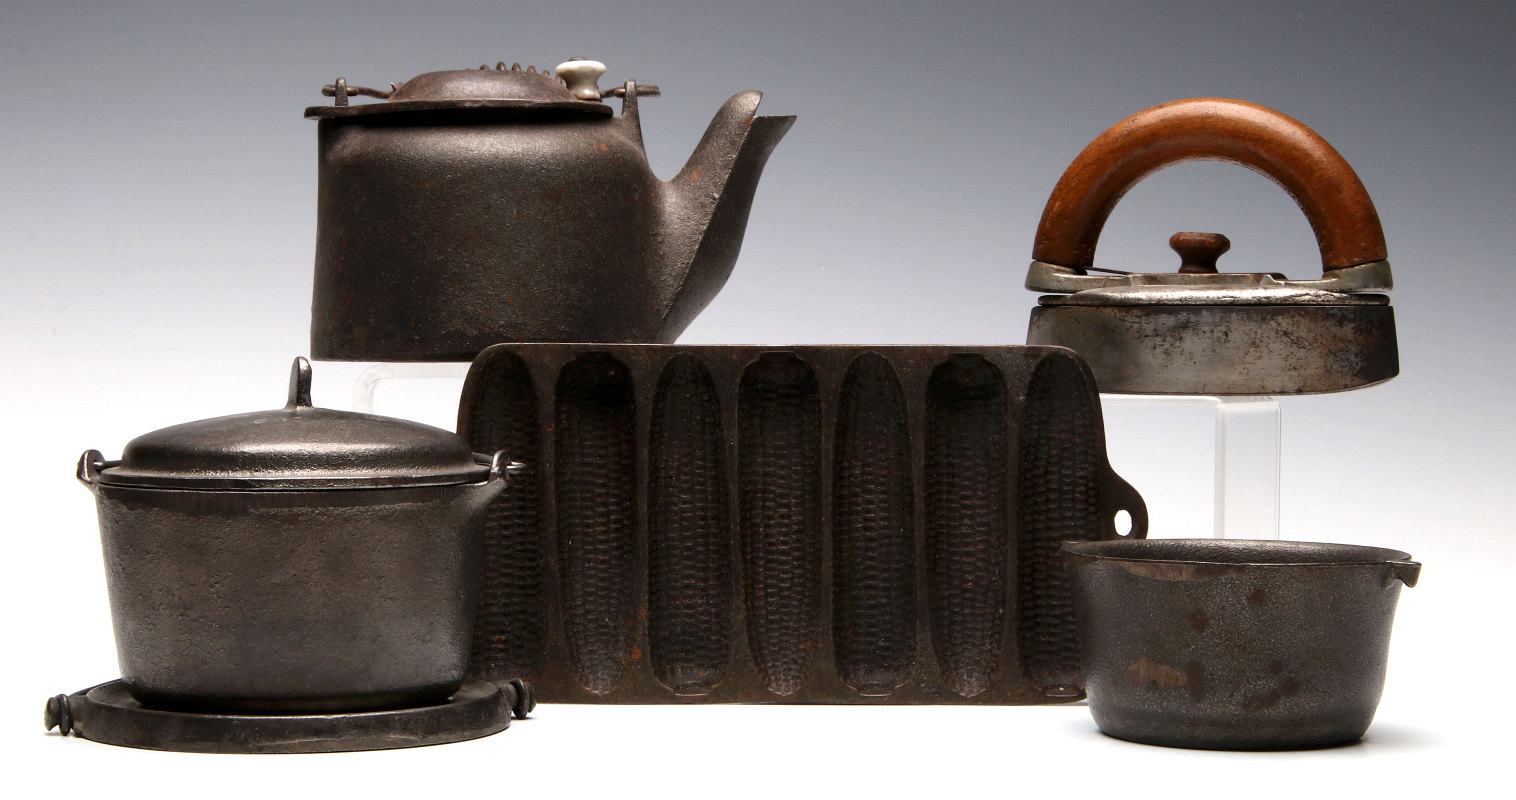 WAGNER WARE MINIATURE CAST IRON COOKWARE SAMPLES